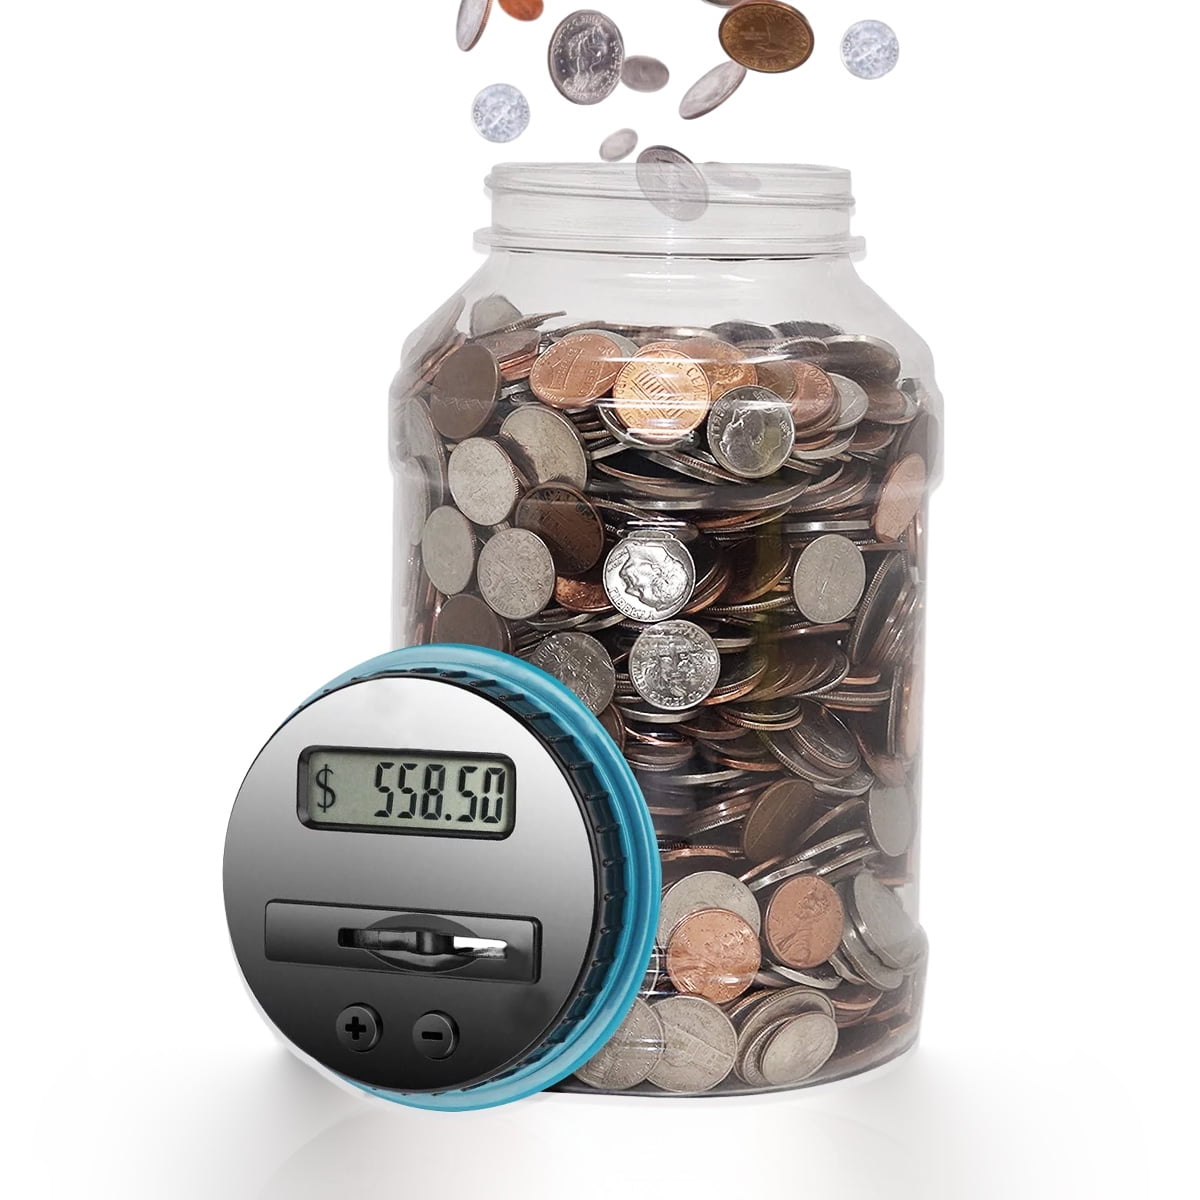 2020 New Clear Digital Piggy Bank USD/EUR/GBP Coin Savings Counter Counting  Money Jar Change Gift Money Box LCD Penny Bank Drop Ship